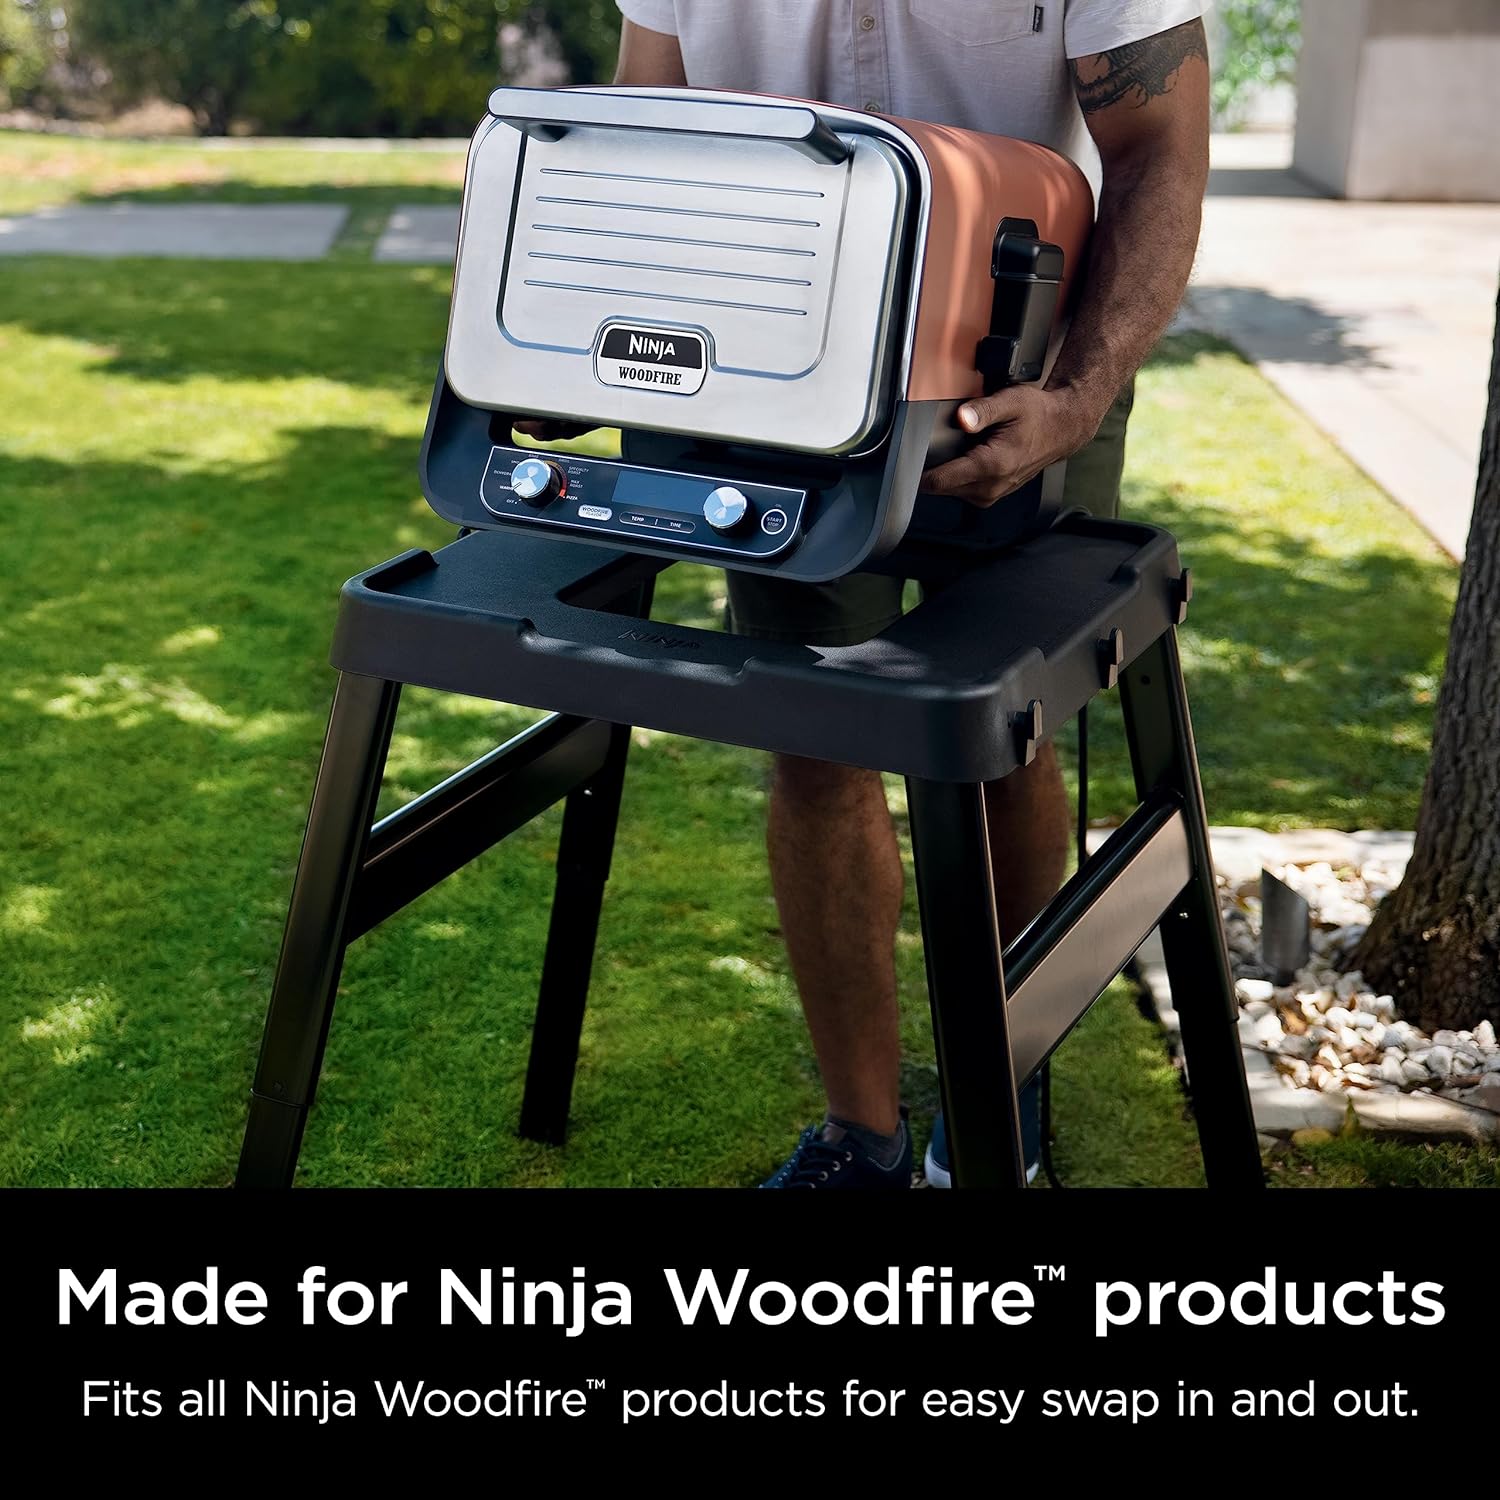 Ninja OG951 Woodfire Pro Connect Premium XL Outdoor Grill  Smoker, Bluetooth, App Enabled, 7-in-1 Master Grill, BBQ Smoker, Outdoor Air Fryer, Woodfire Technology, 2 Built-In Thermometers, Black - Ninja OG951 Woodfire Pro Connect Premium XL Outdoor Grill & Smoker Review